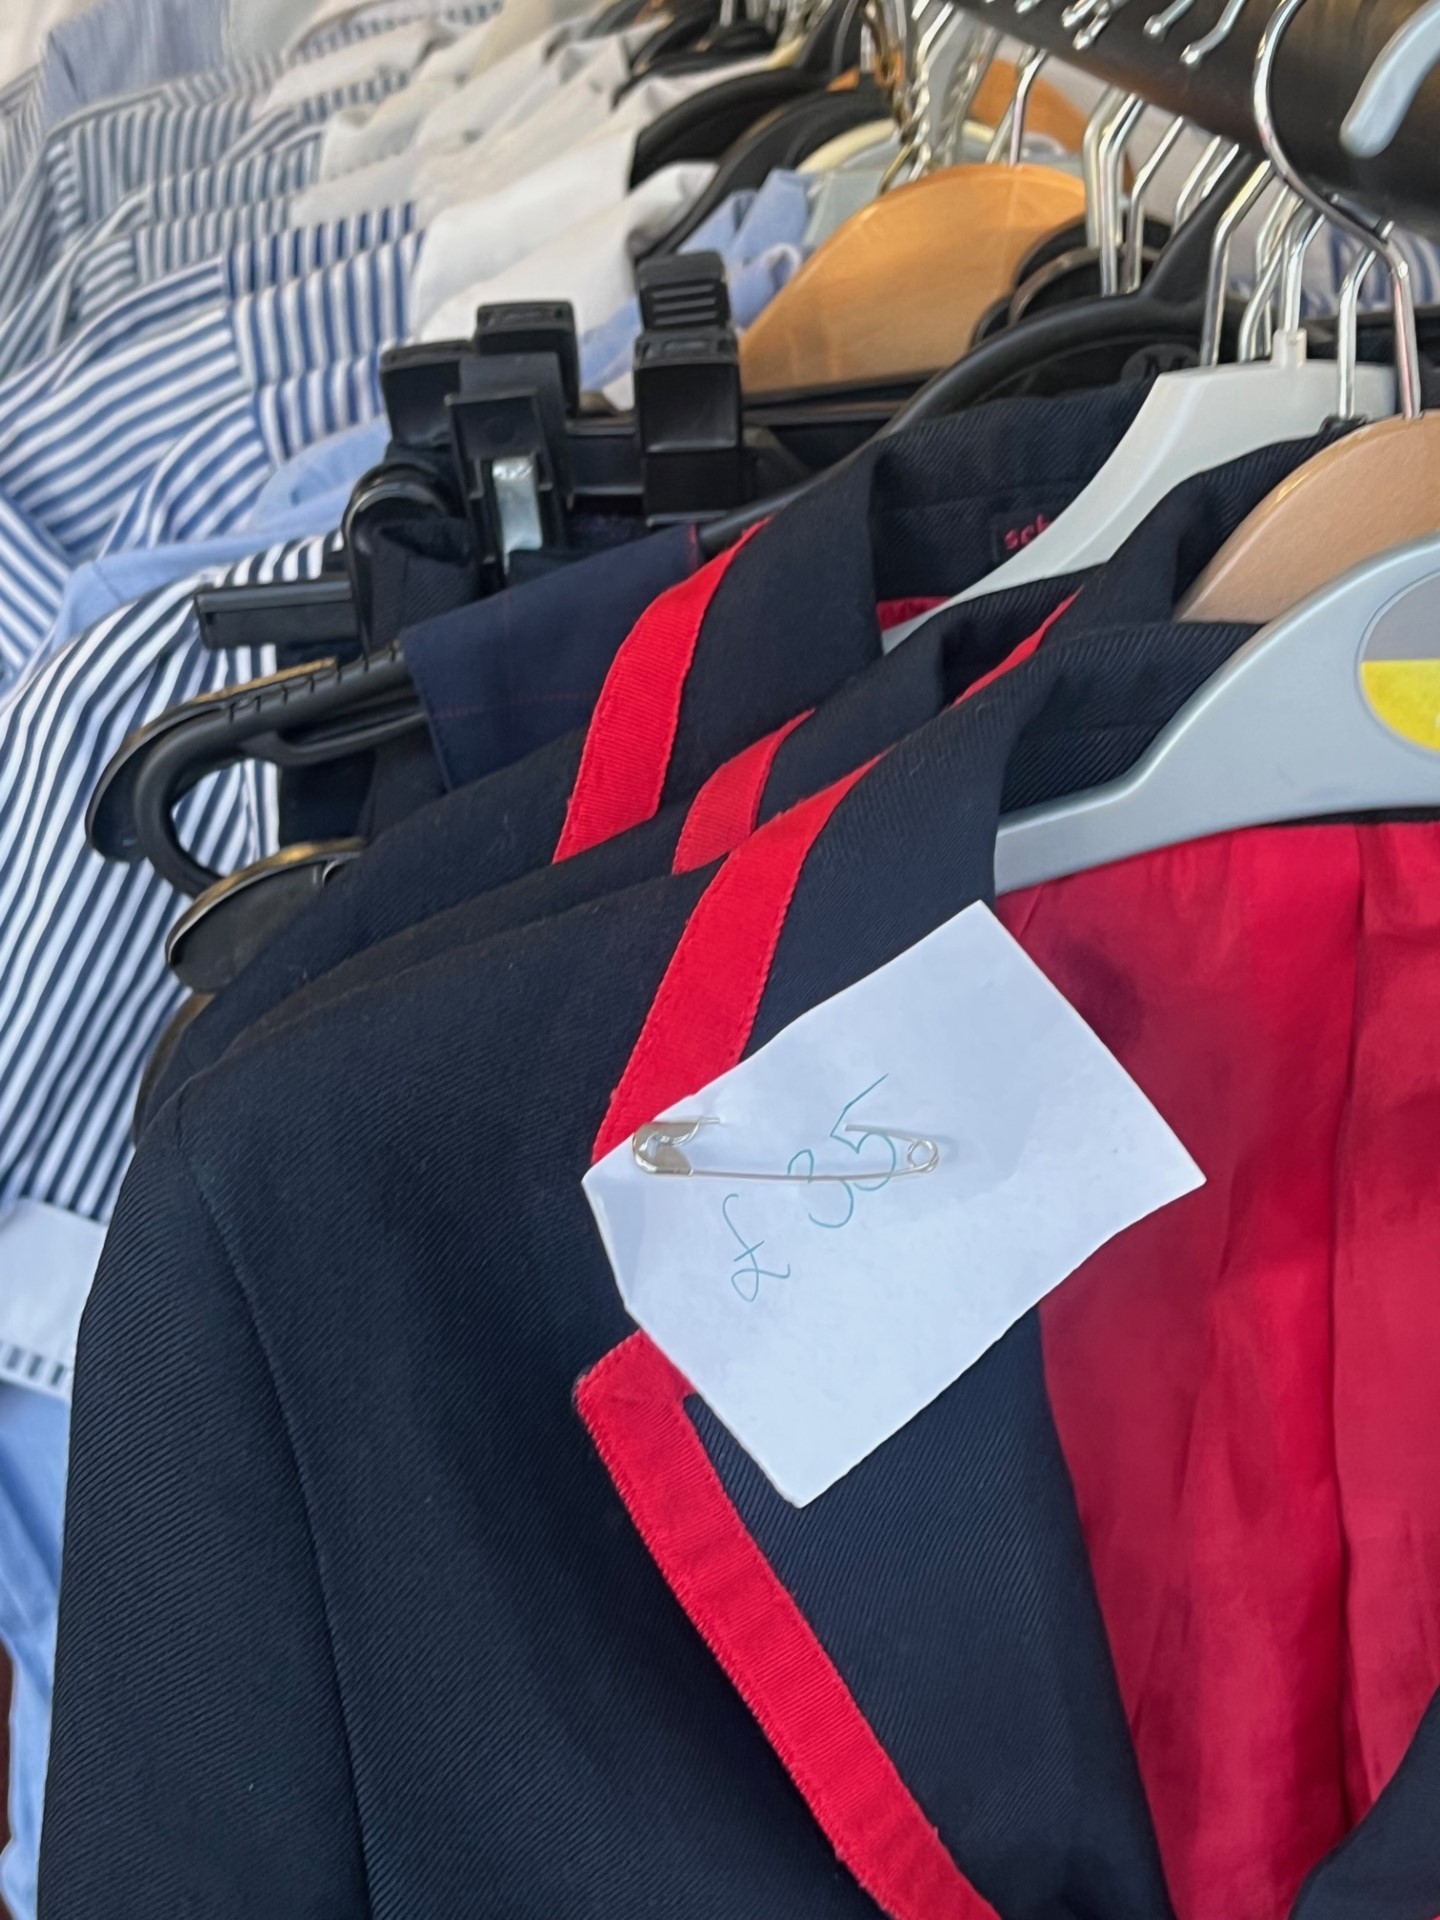 Picture of second-hand uniform hanging on a rail with a price tag pinned on